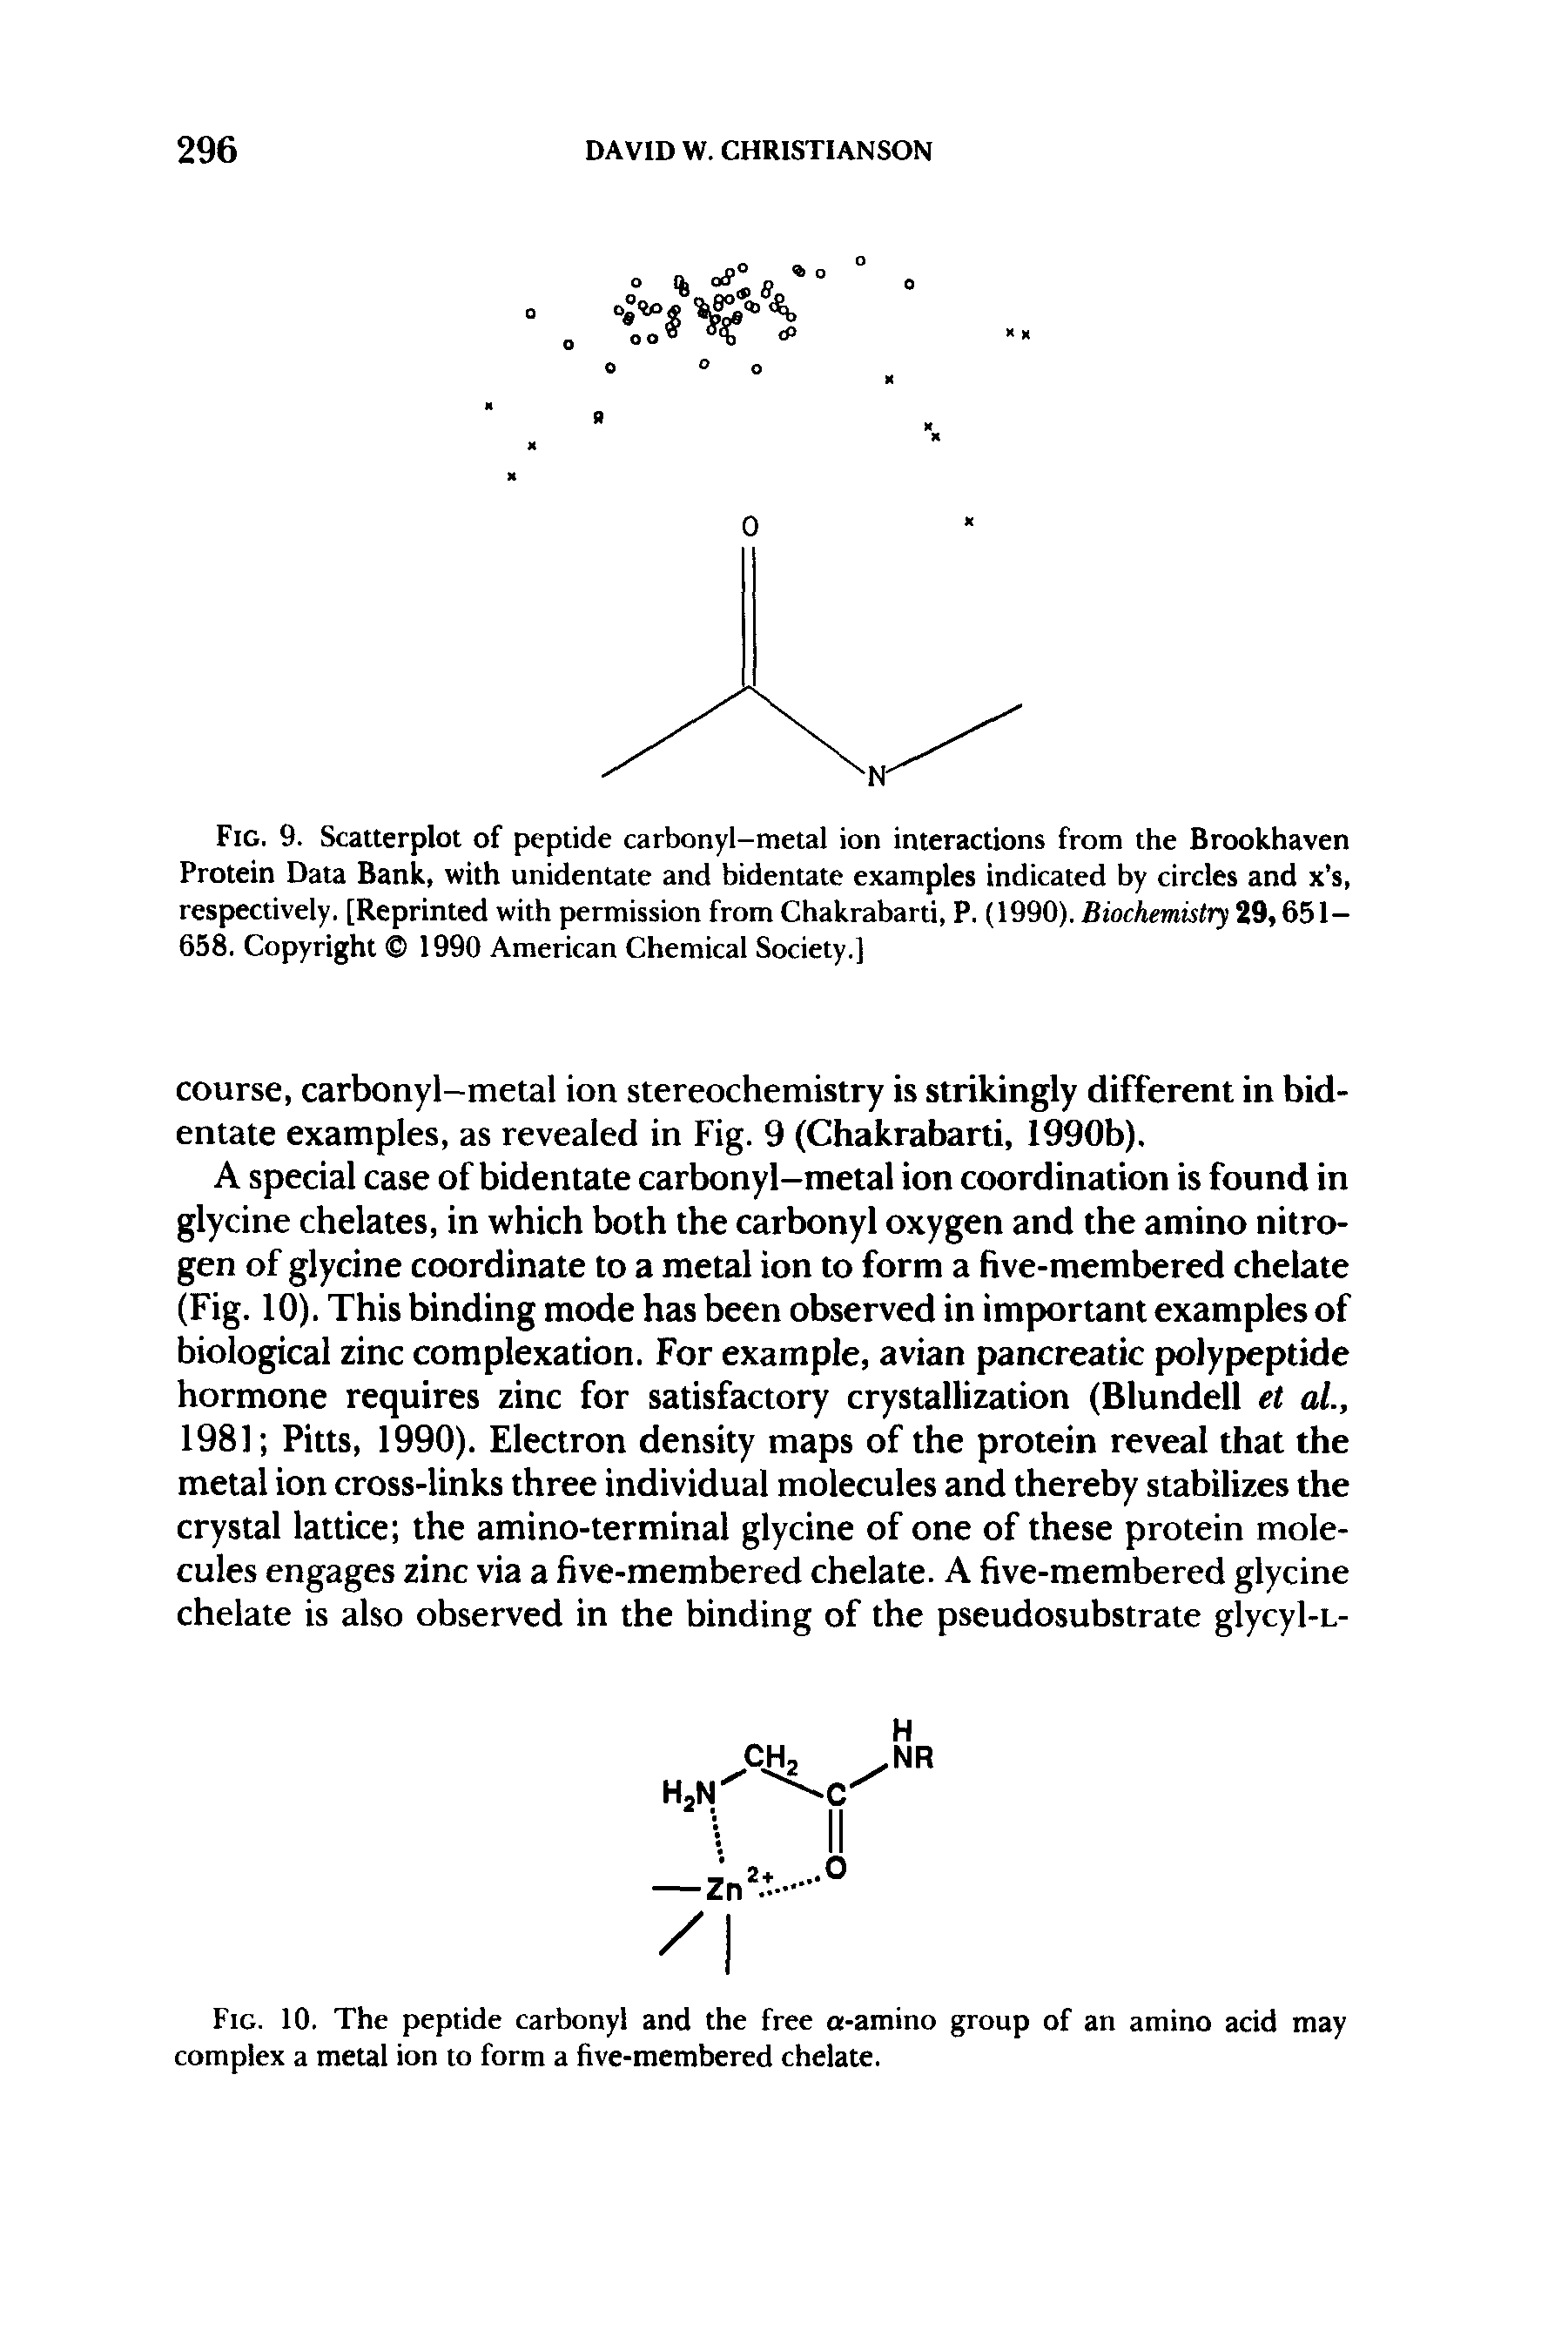 Fig. 10. The peptide carbonyl and the free a-amino group of an amino acid may complex a metal ion to form a five-membered chelate.